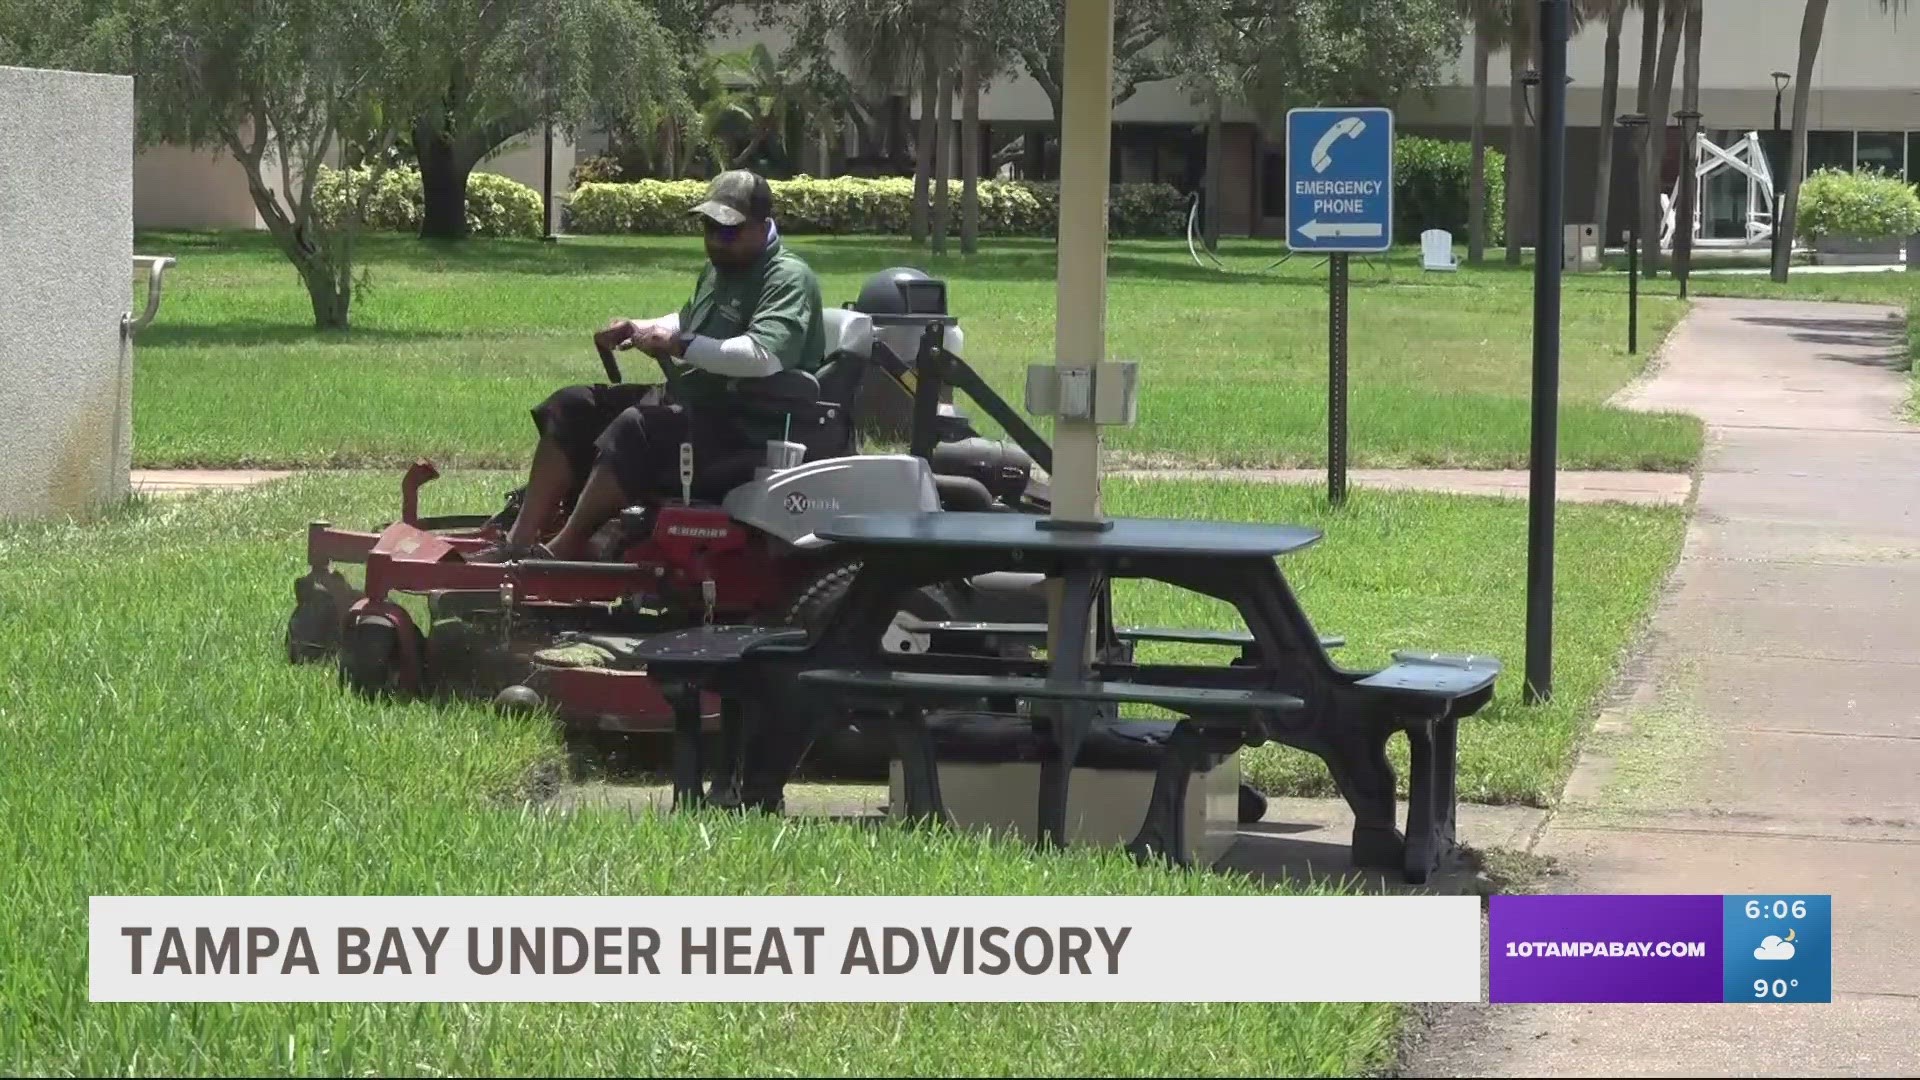 It comes after Tampa broke its Fourth of July record with temperatures hitting 97 degrees.